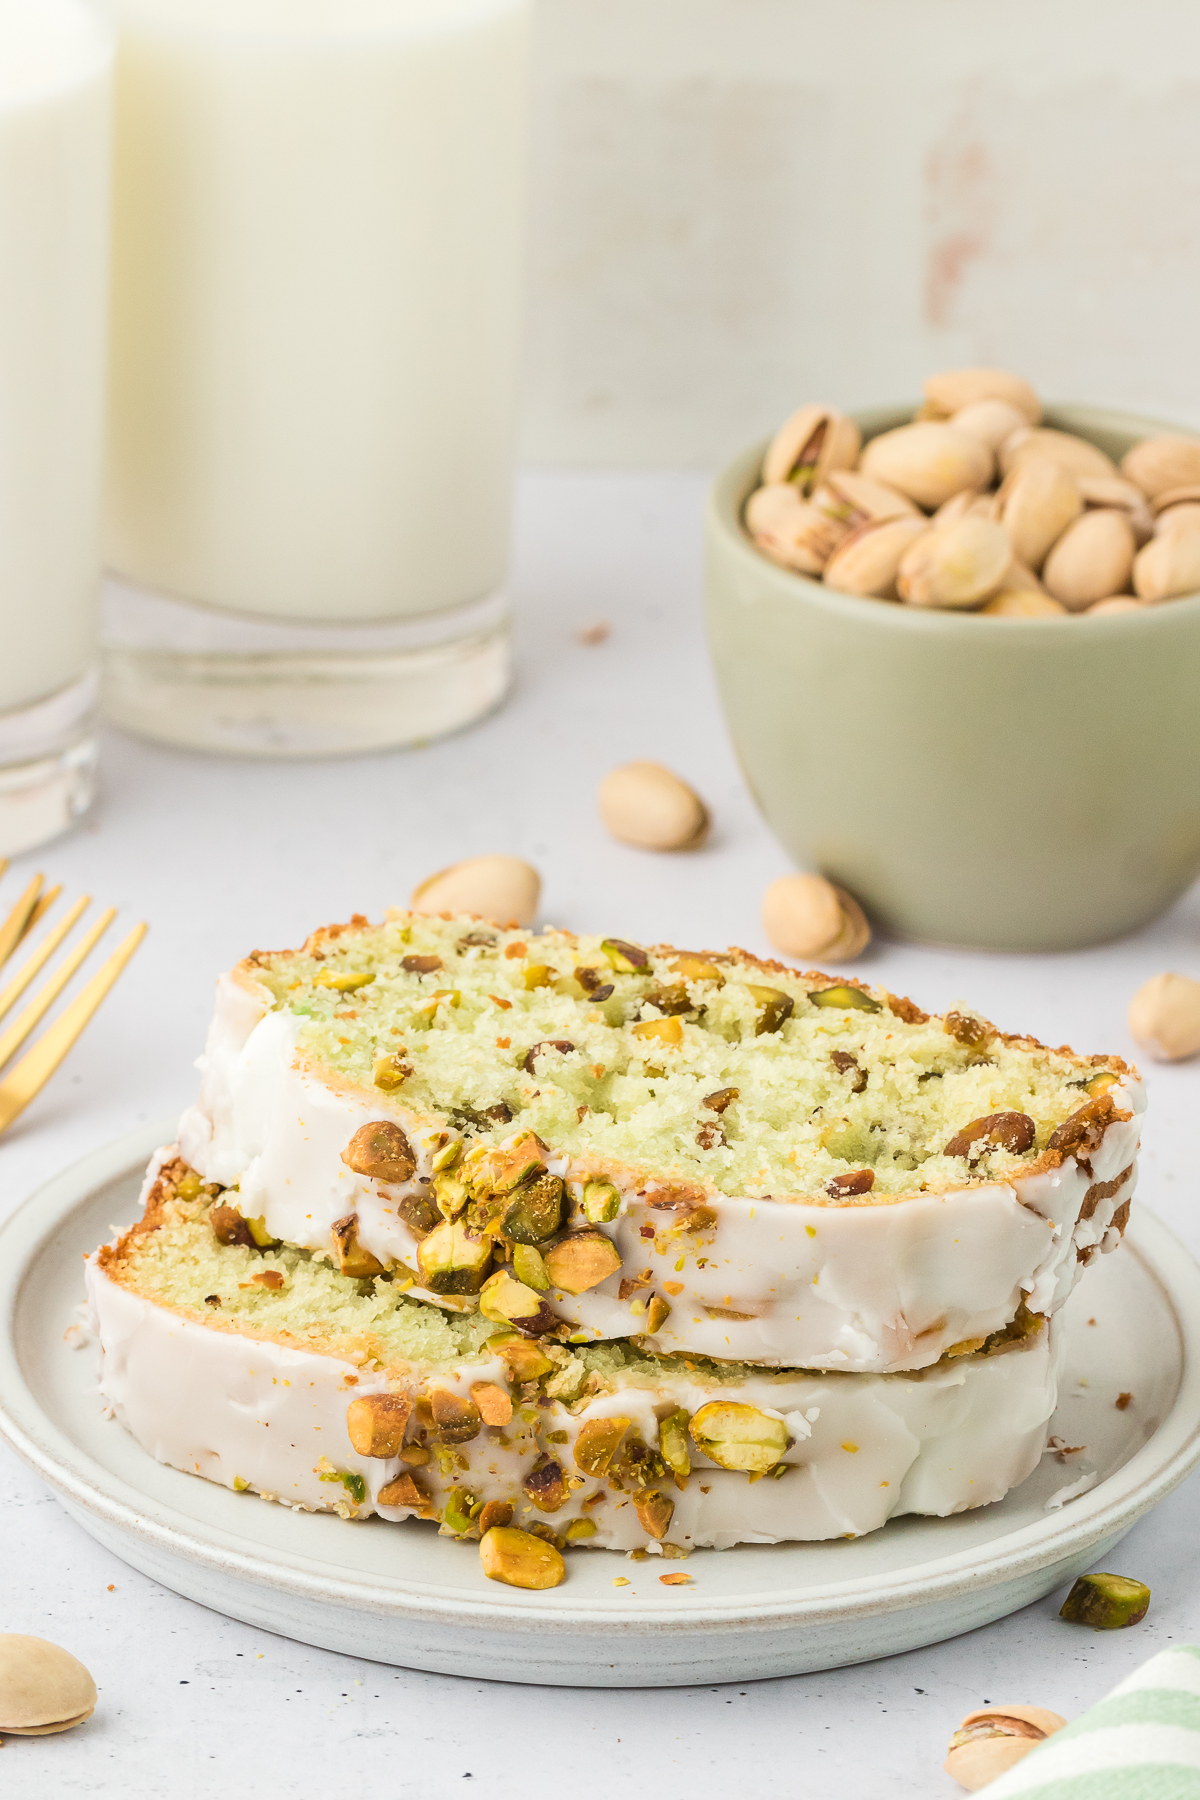 two slices of pistachio quick bread on plate